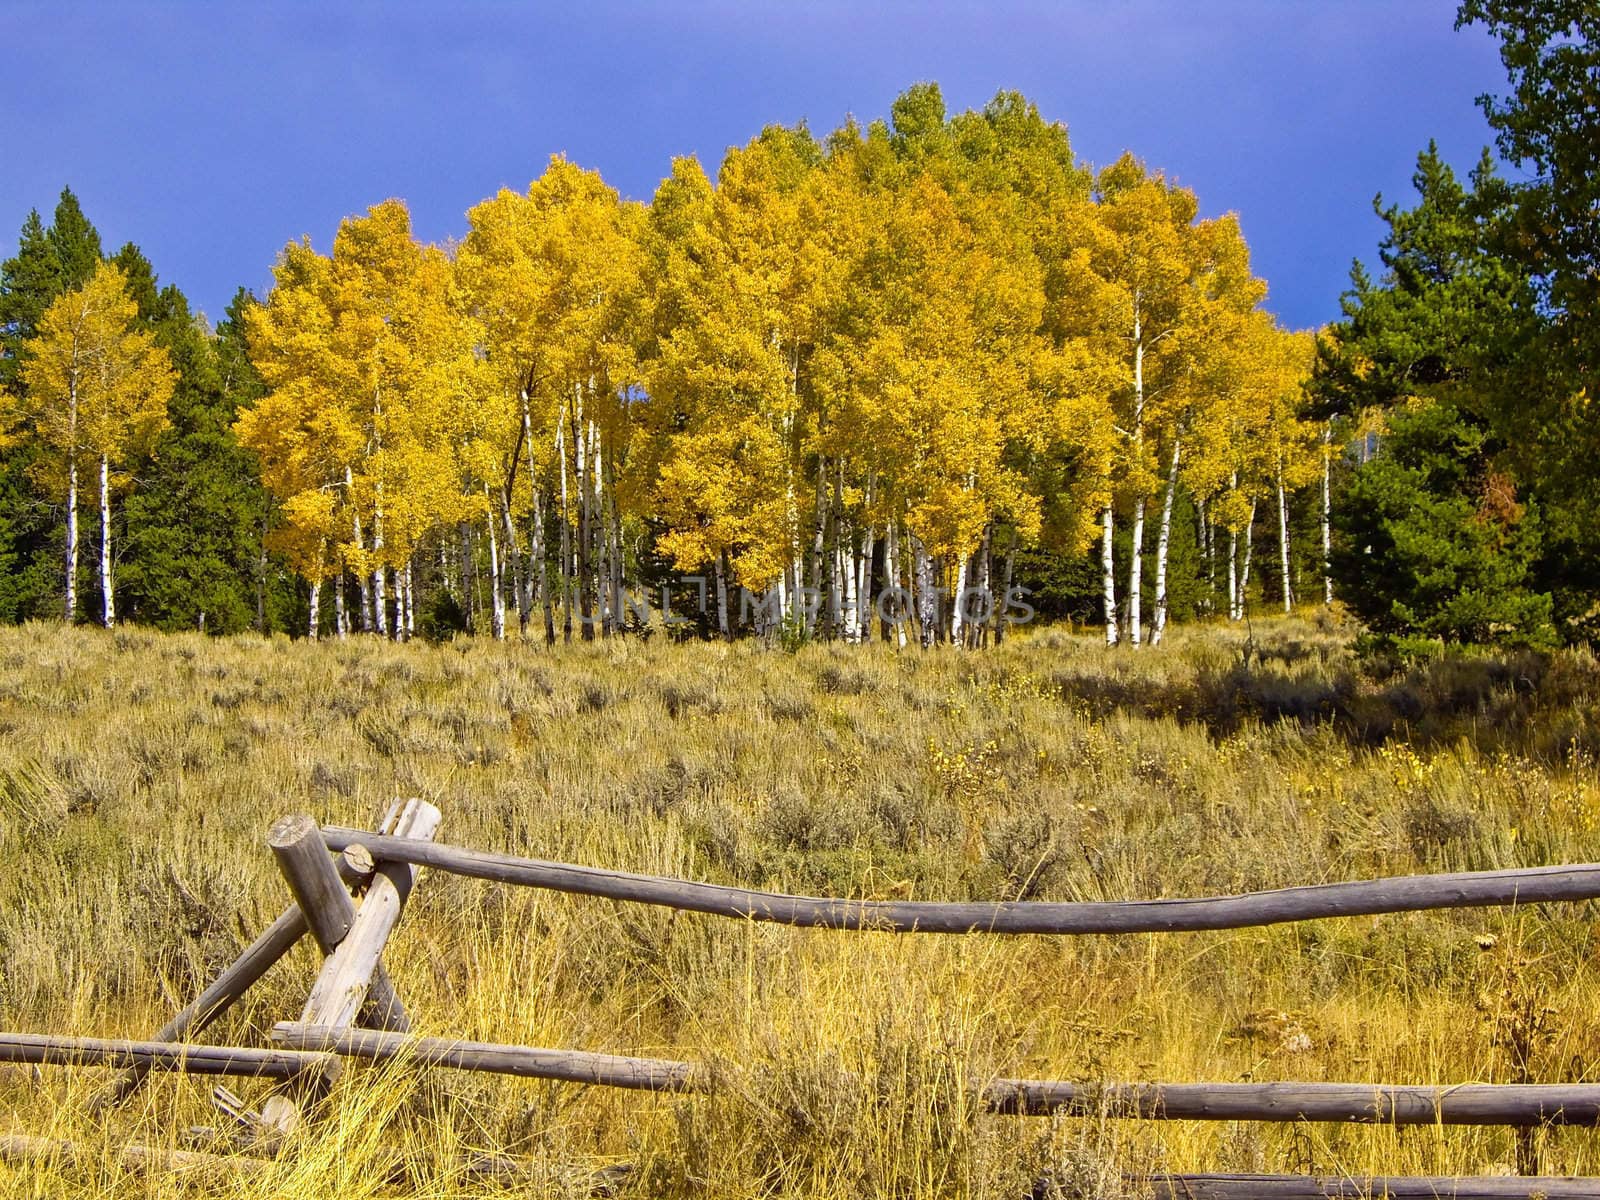 Yellow aspens in Fall with jakeleg fence in foreground